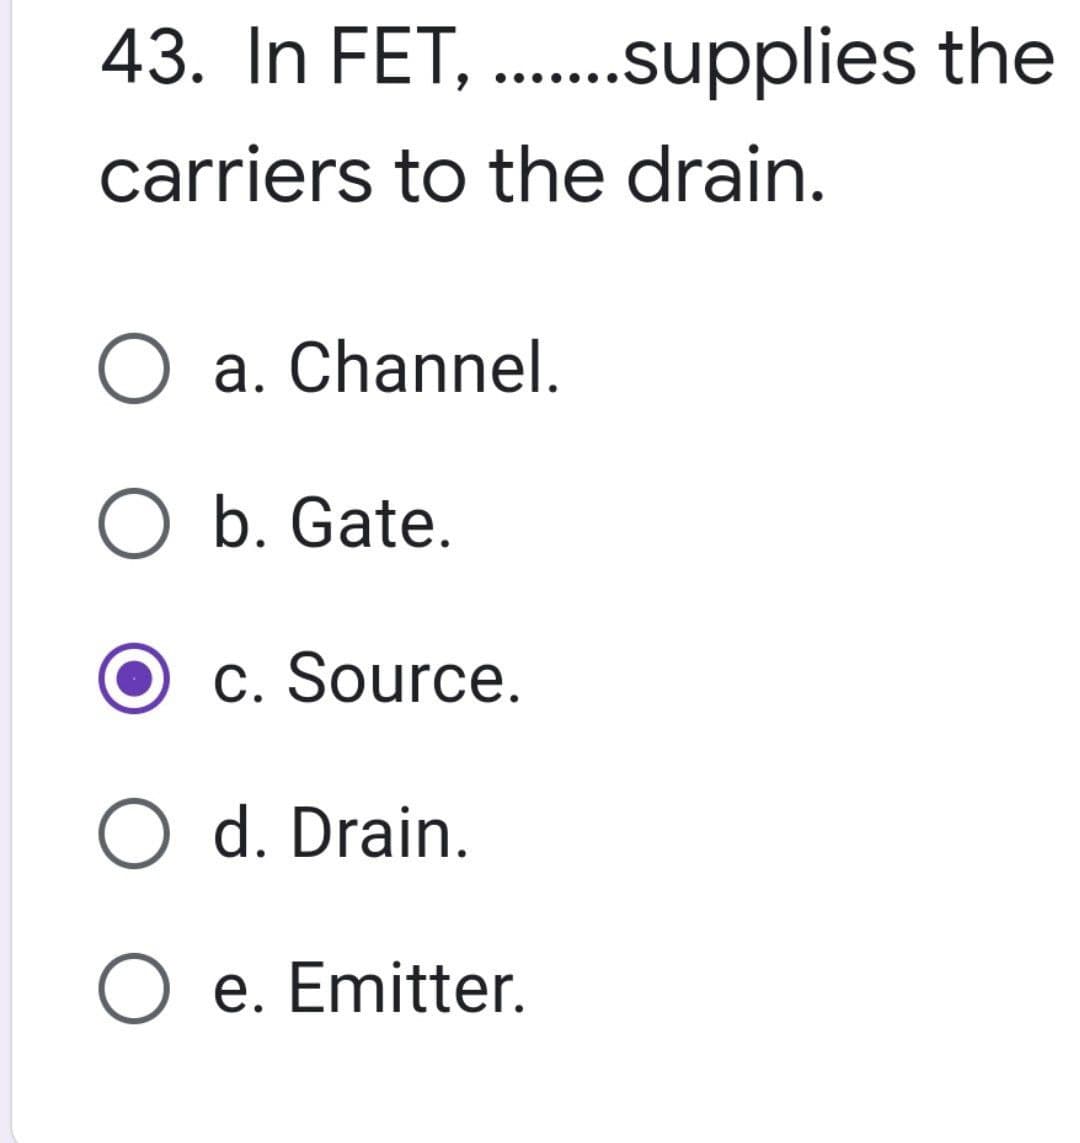 43. In FET,
carriers to the drain.
.......supplies the
O a. Channel.
O b. Gate.
c. Source.
O d. Drain.
O e. Emitter.